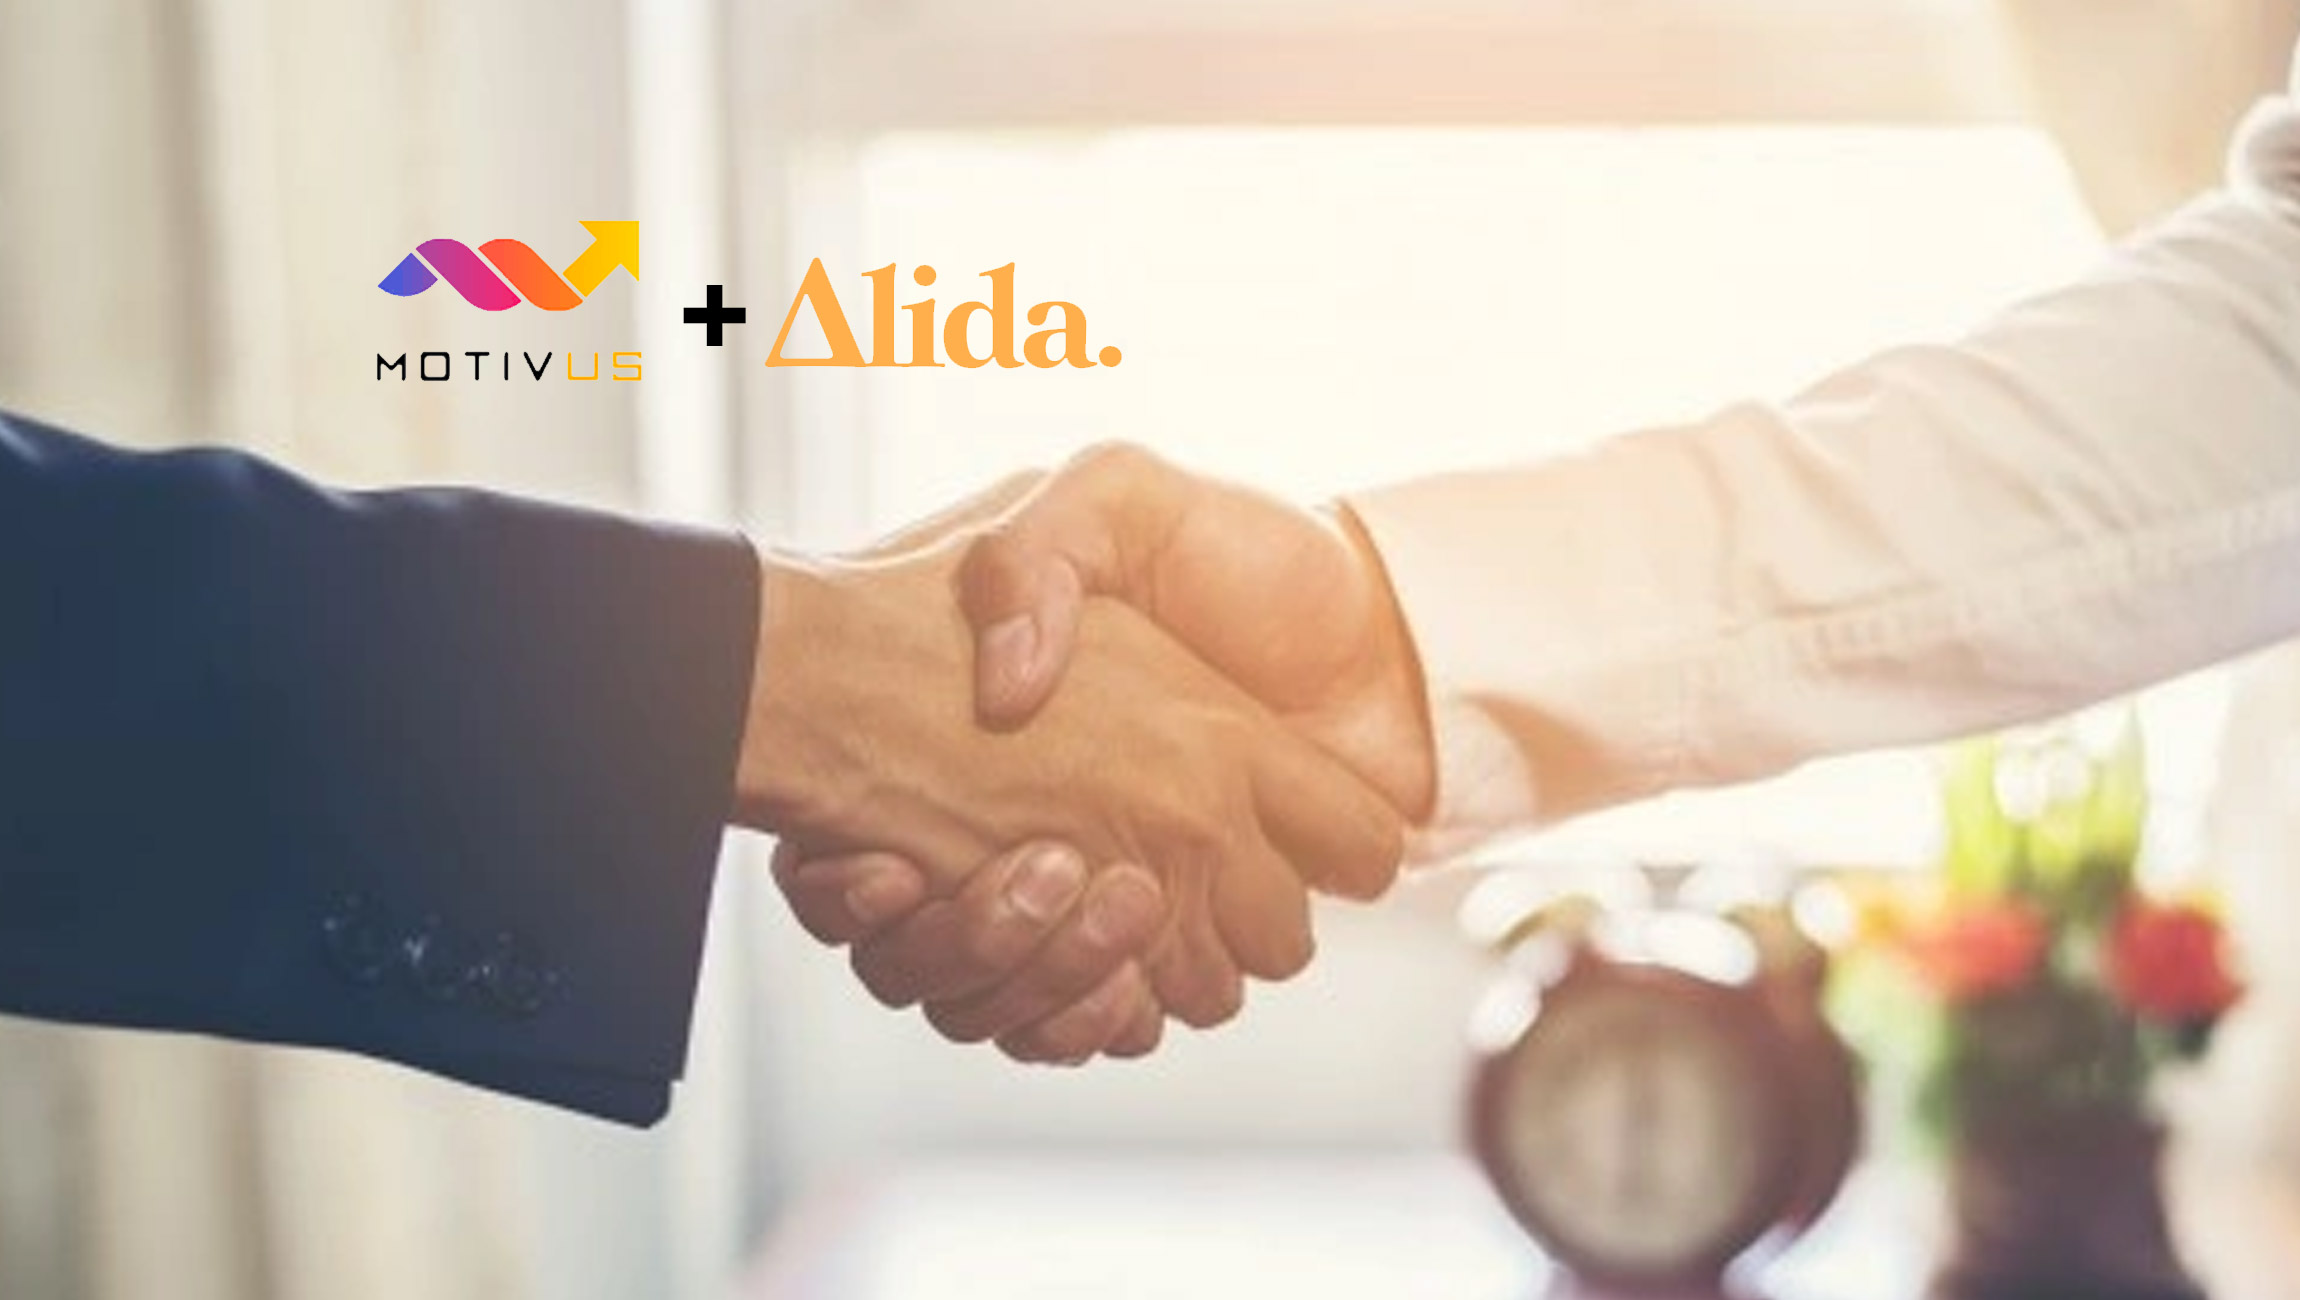 Motivus-Joins-the-Alida-Partner-Network-to-Deliver-Tailored-Customer-Experiences-in-Singapore